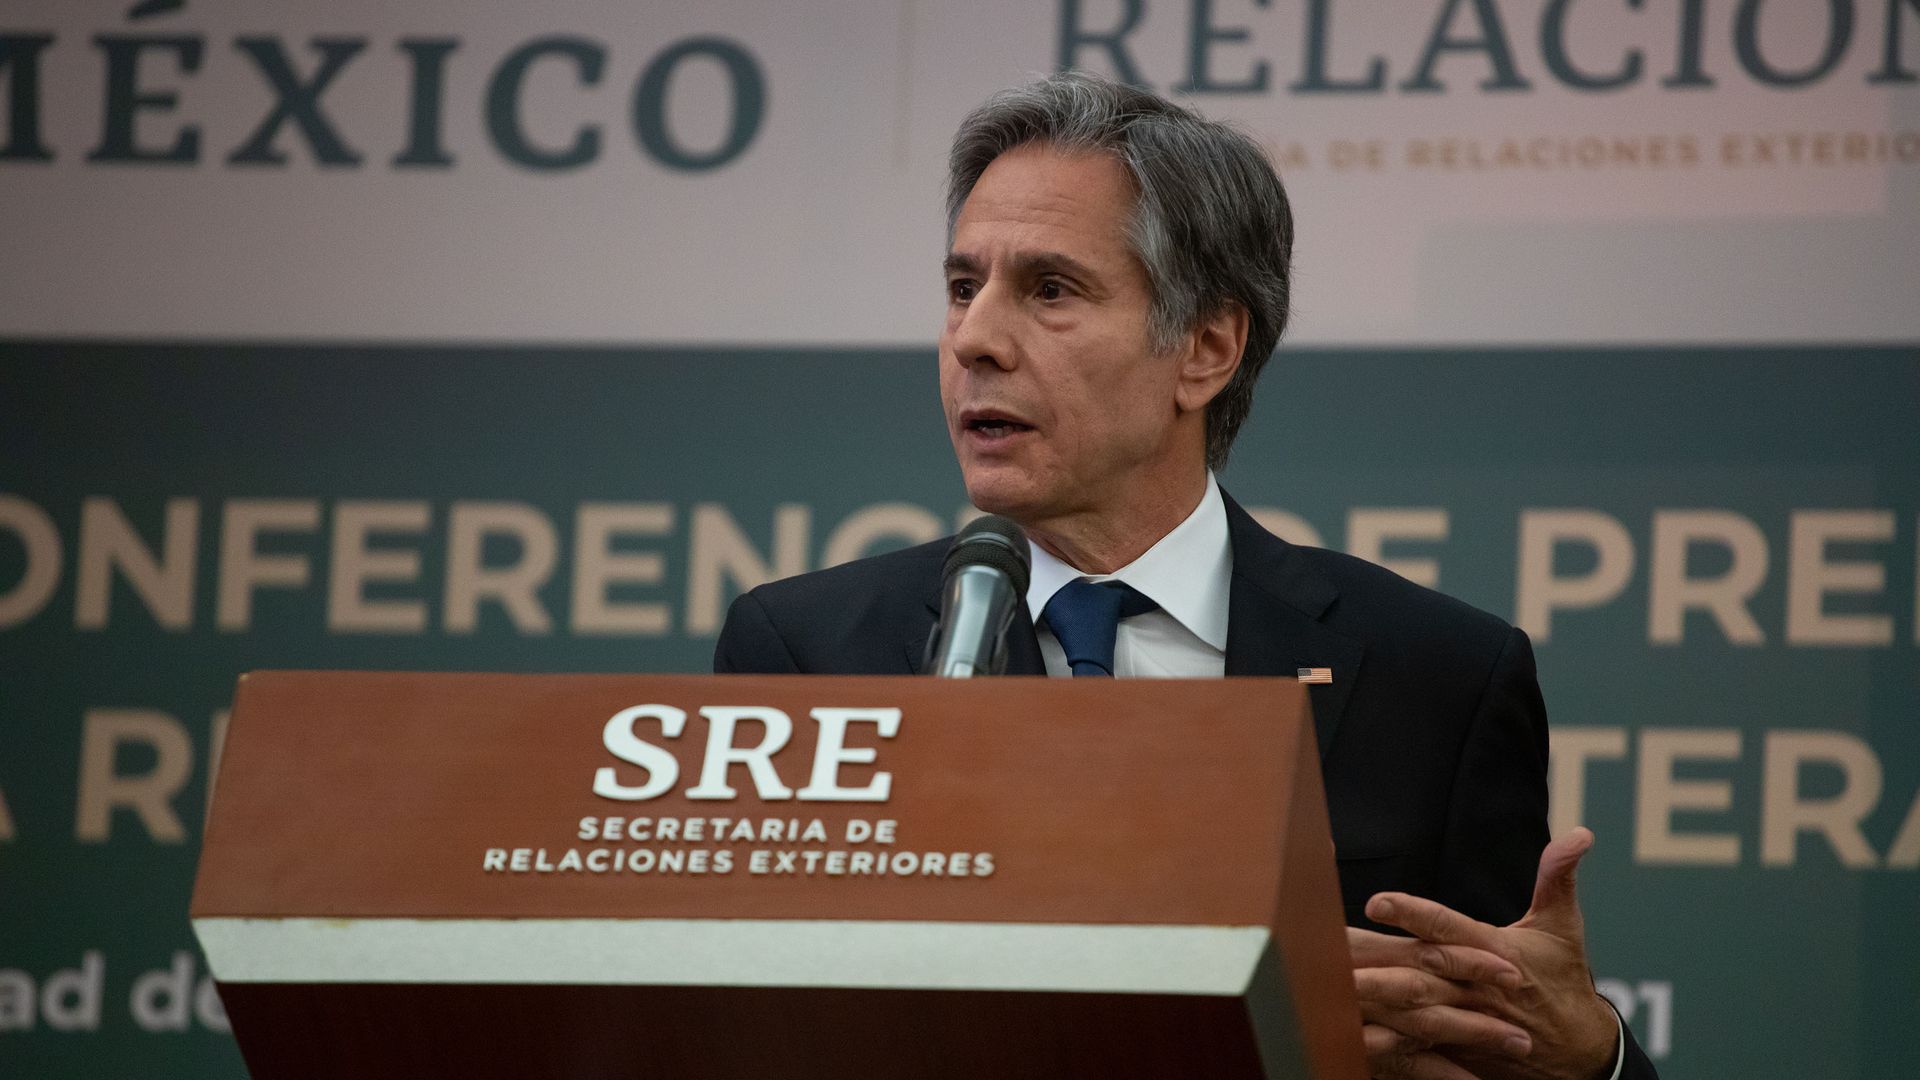 U.S. secretary of state, Antony Blinken speaks during a press conference about the bilateral relation between Mexico and the United States, in Mexico City, Mexico on October 08, 2021